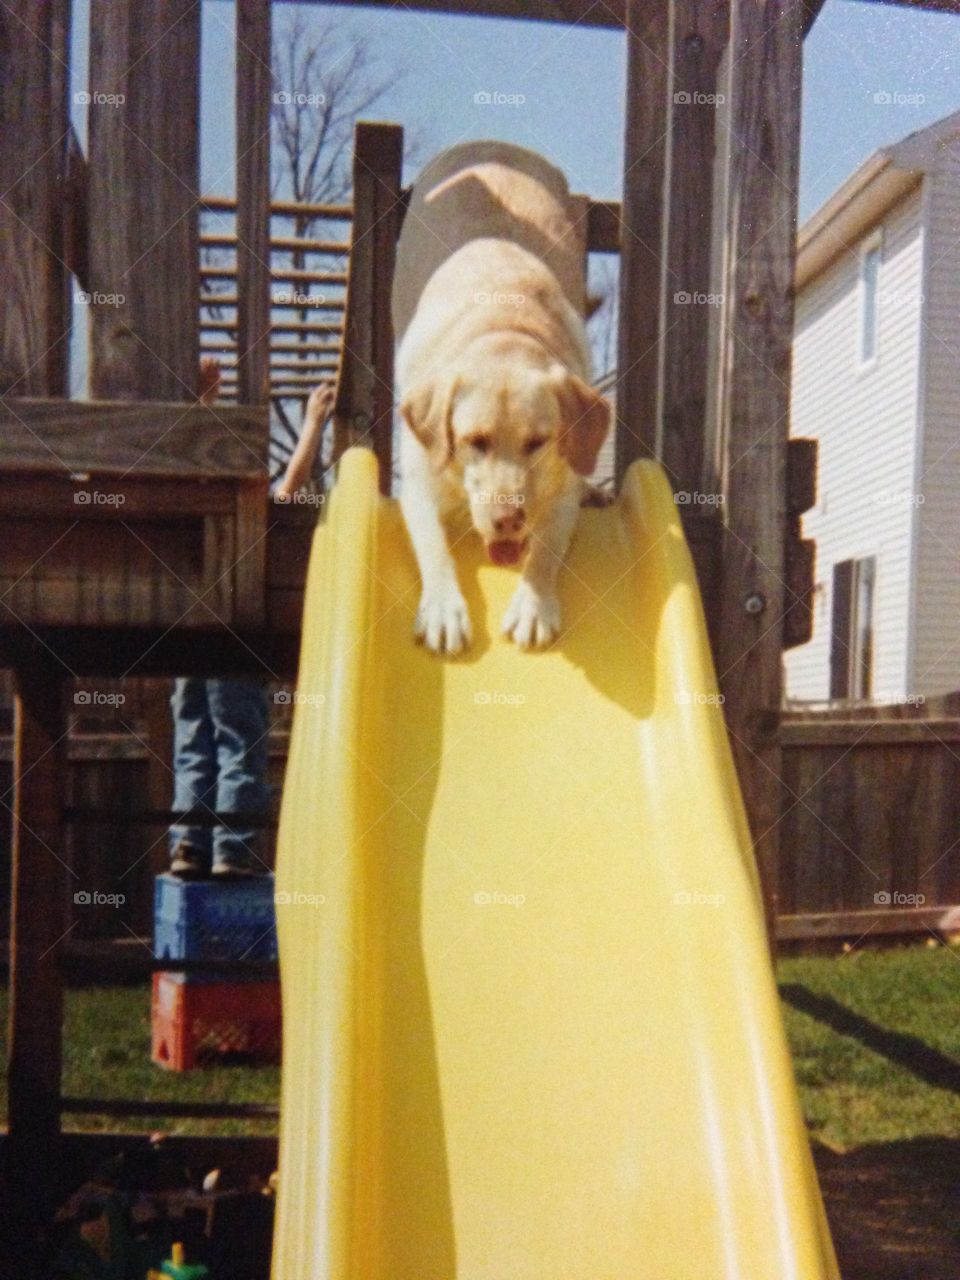 This yellow lab loves going down the slide.